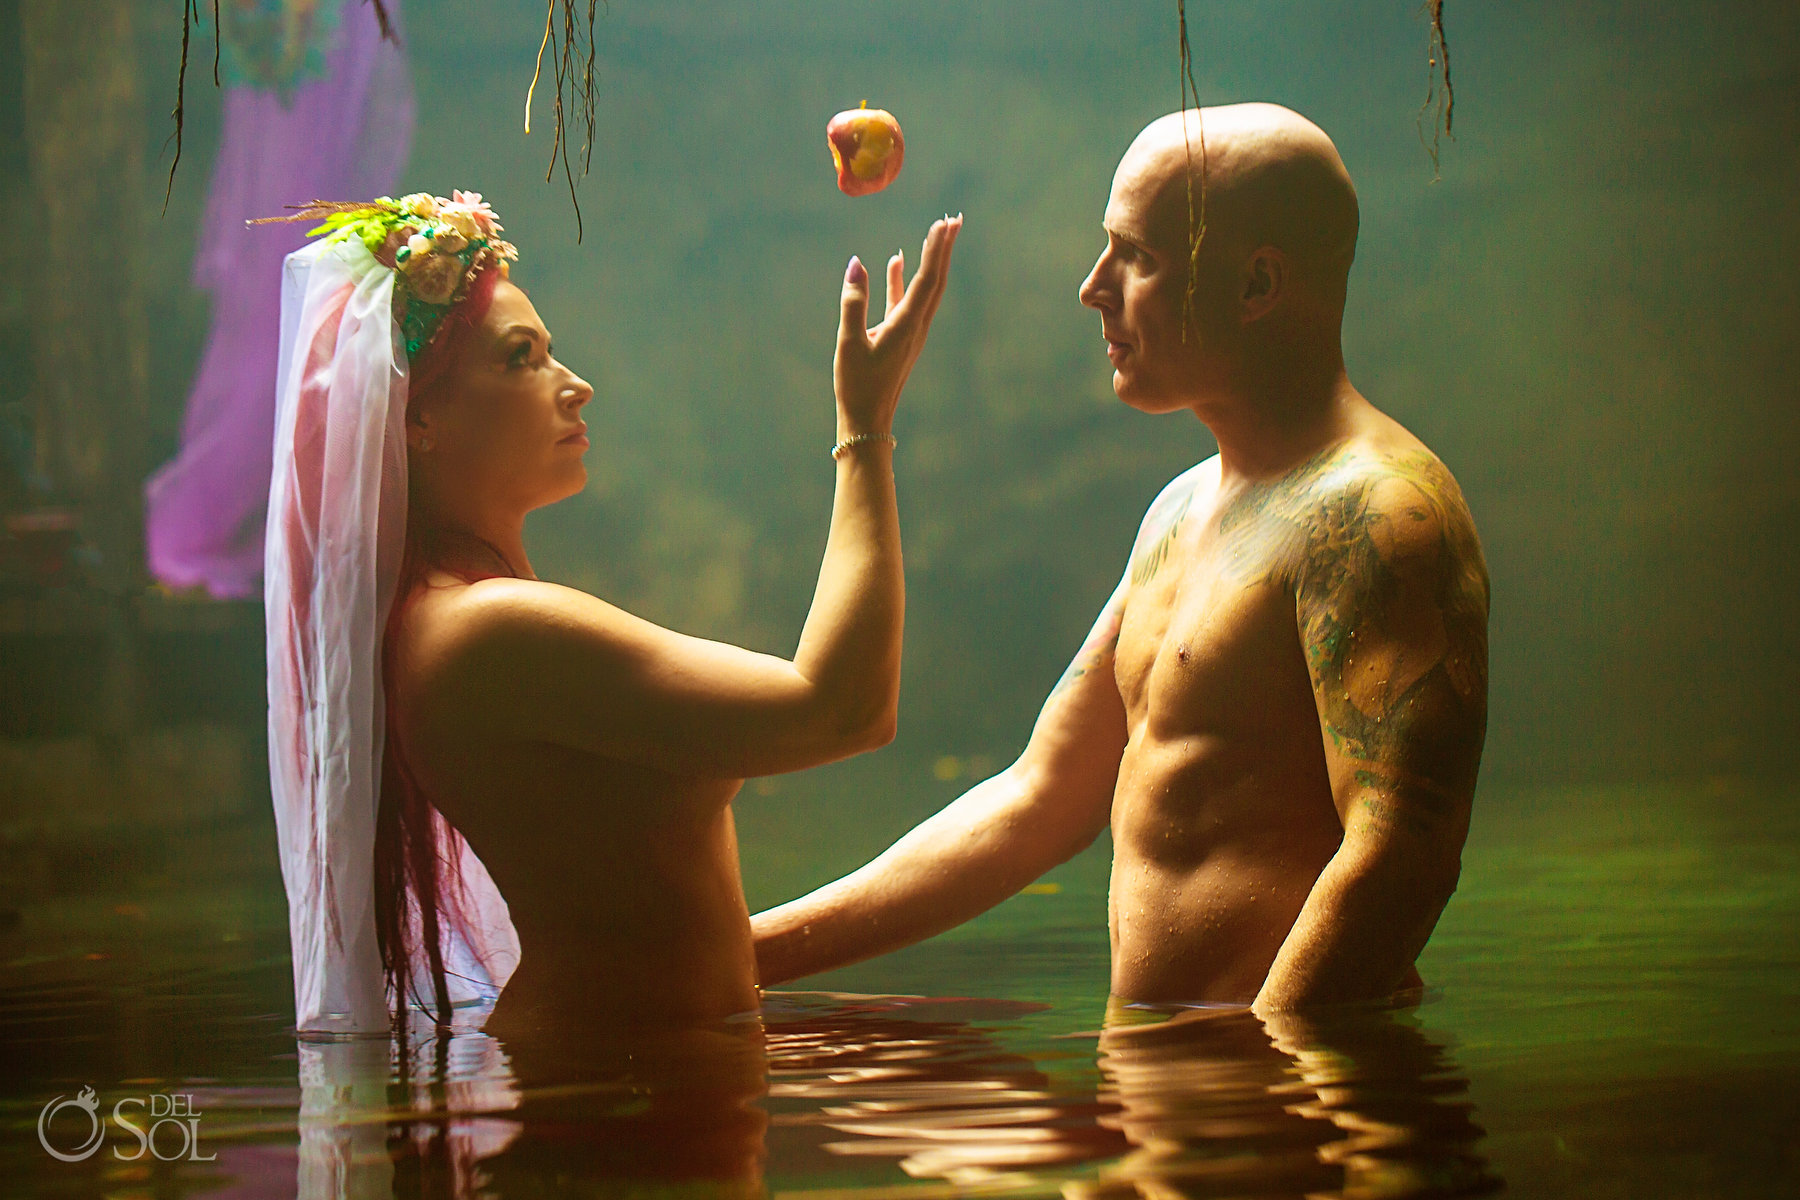 adam and eve apple of discord conceptual fine art photography